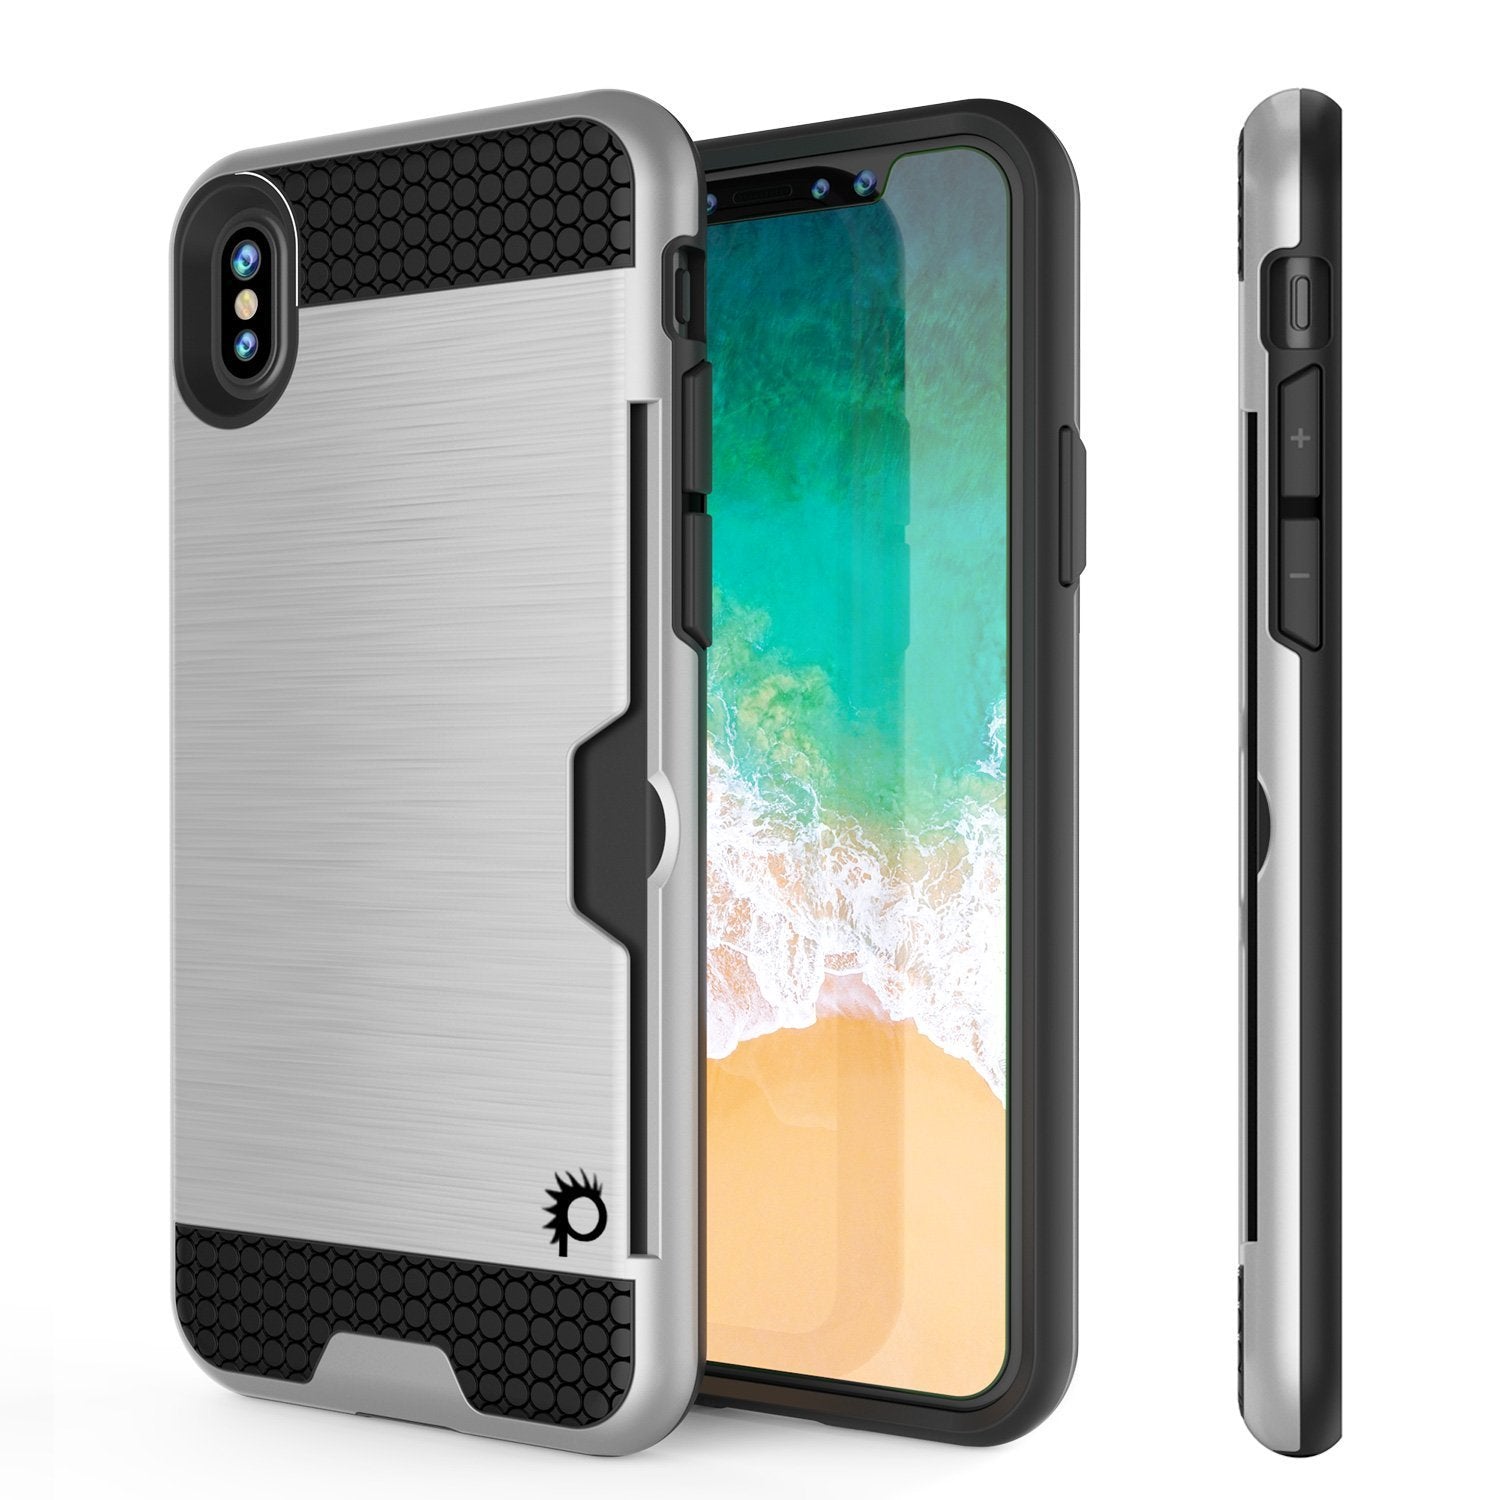 iPhone XR Case, PUNKcase [SLOT Series] Slim Fit Dual-Layer Armor Cover [White]